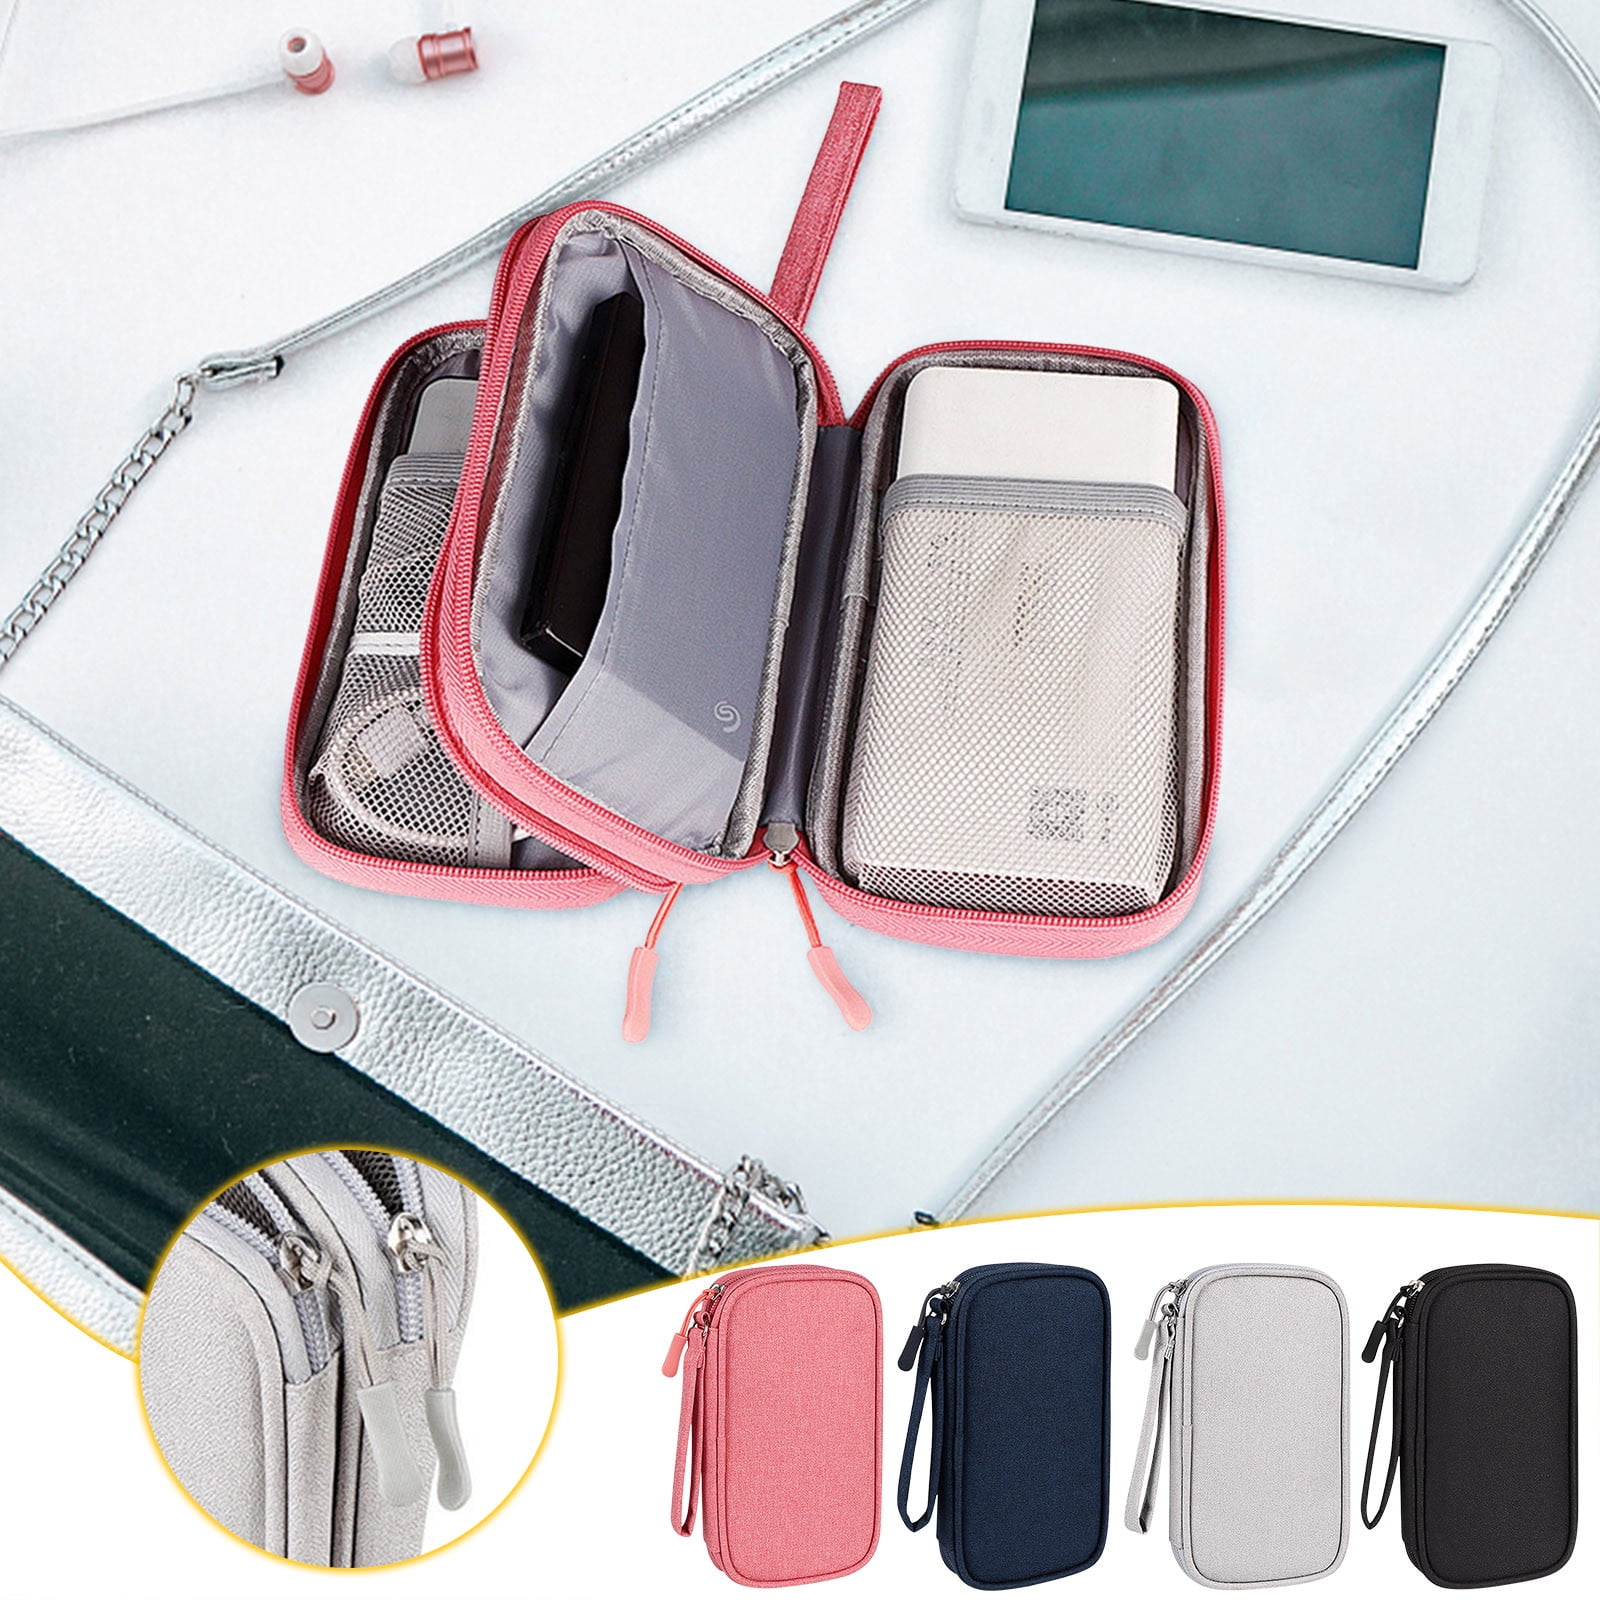 Travel Case Cords And Chargers